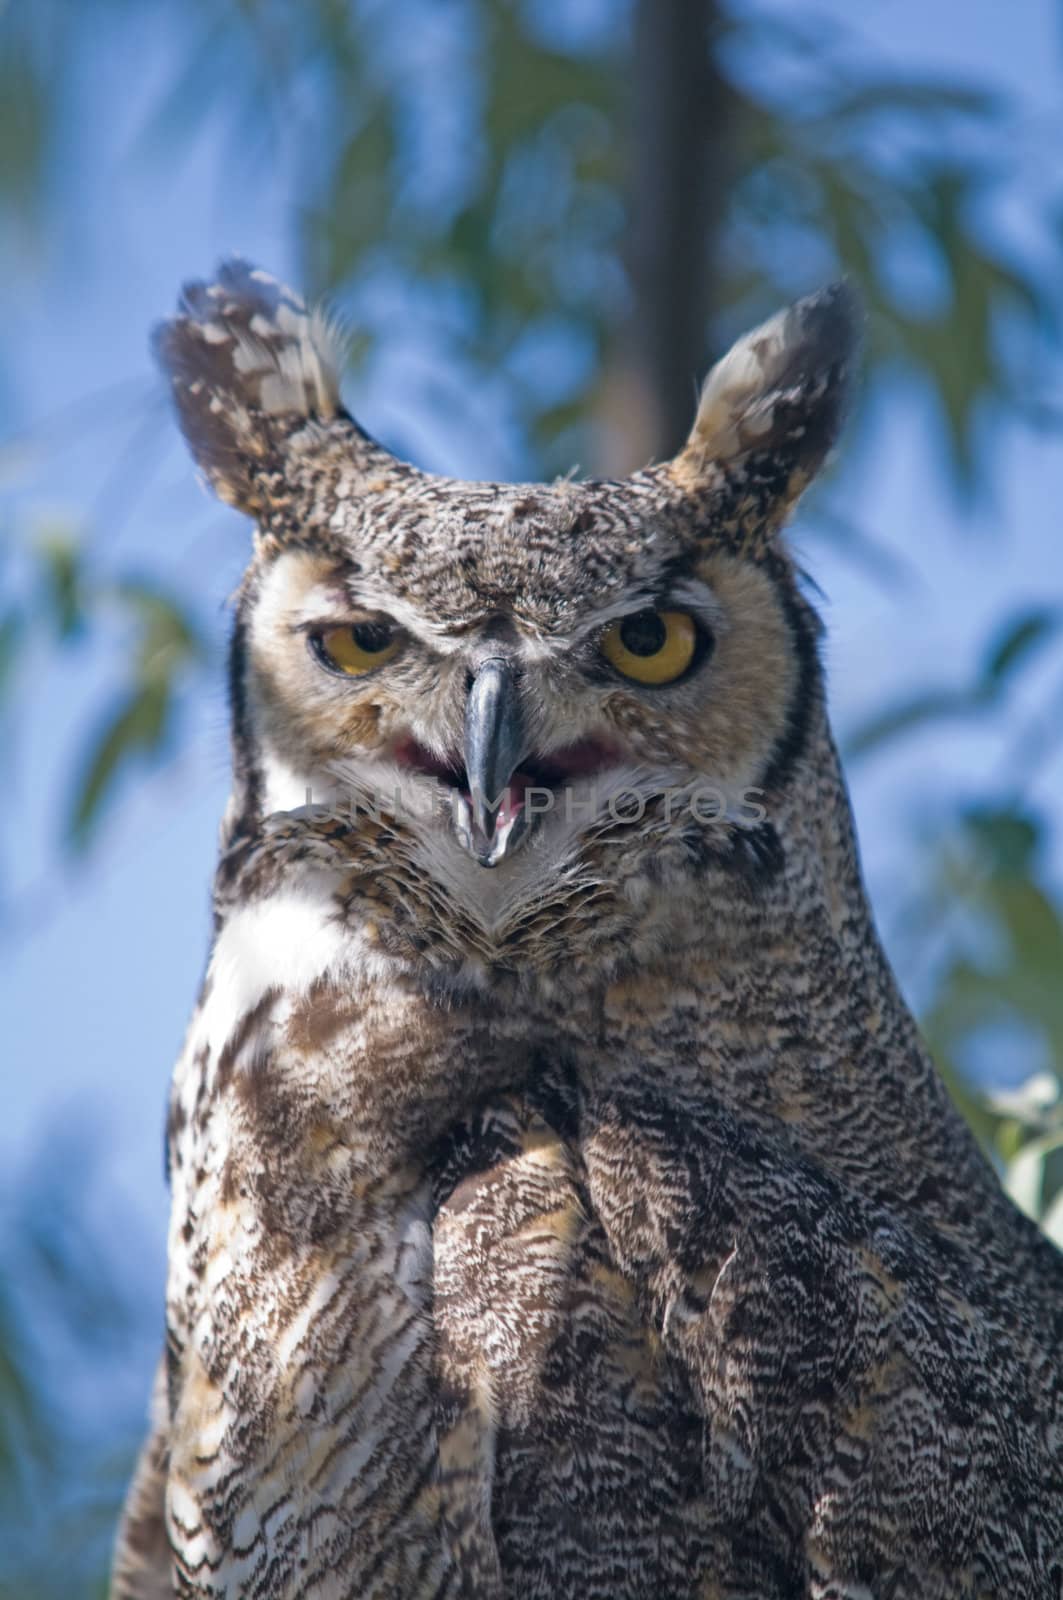 A Portrait of a horned owl sitting in a tree